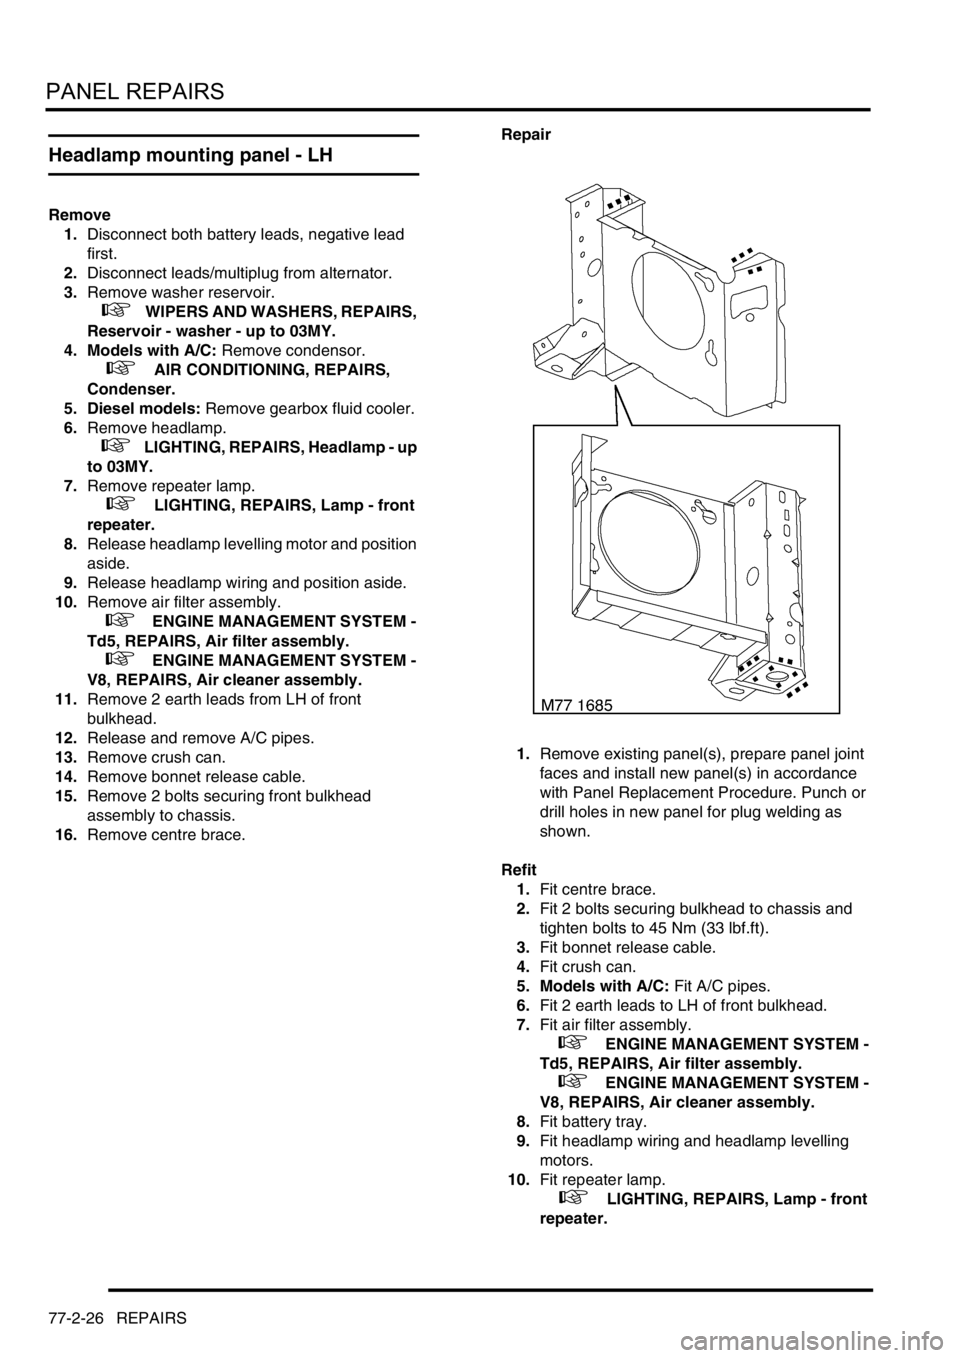 LAND ROVER DISCOVERY 2002 Service Manual PANEL REPAIRS
77-2-26 REPAIRS
Headlamp mounting panel - LH
Remove
1.Disconnect both battery leads, negative lead 
first.
2.Disconnect leads/multiplug from alternator. 
3.Remove washer reservoir.
 
 + 